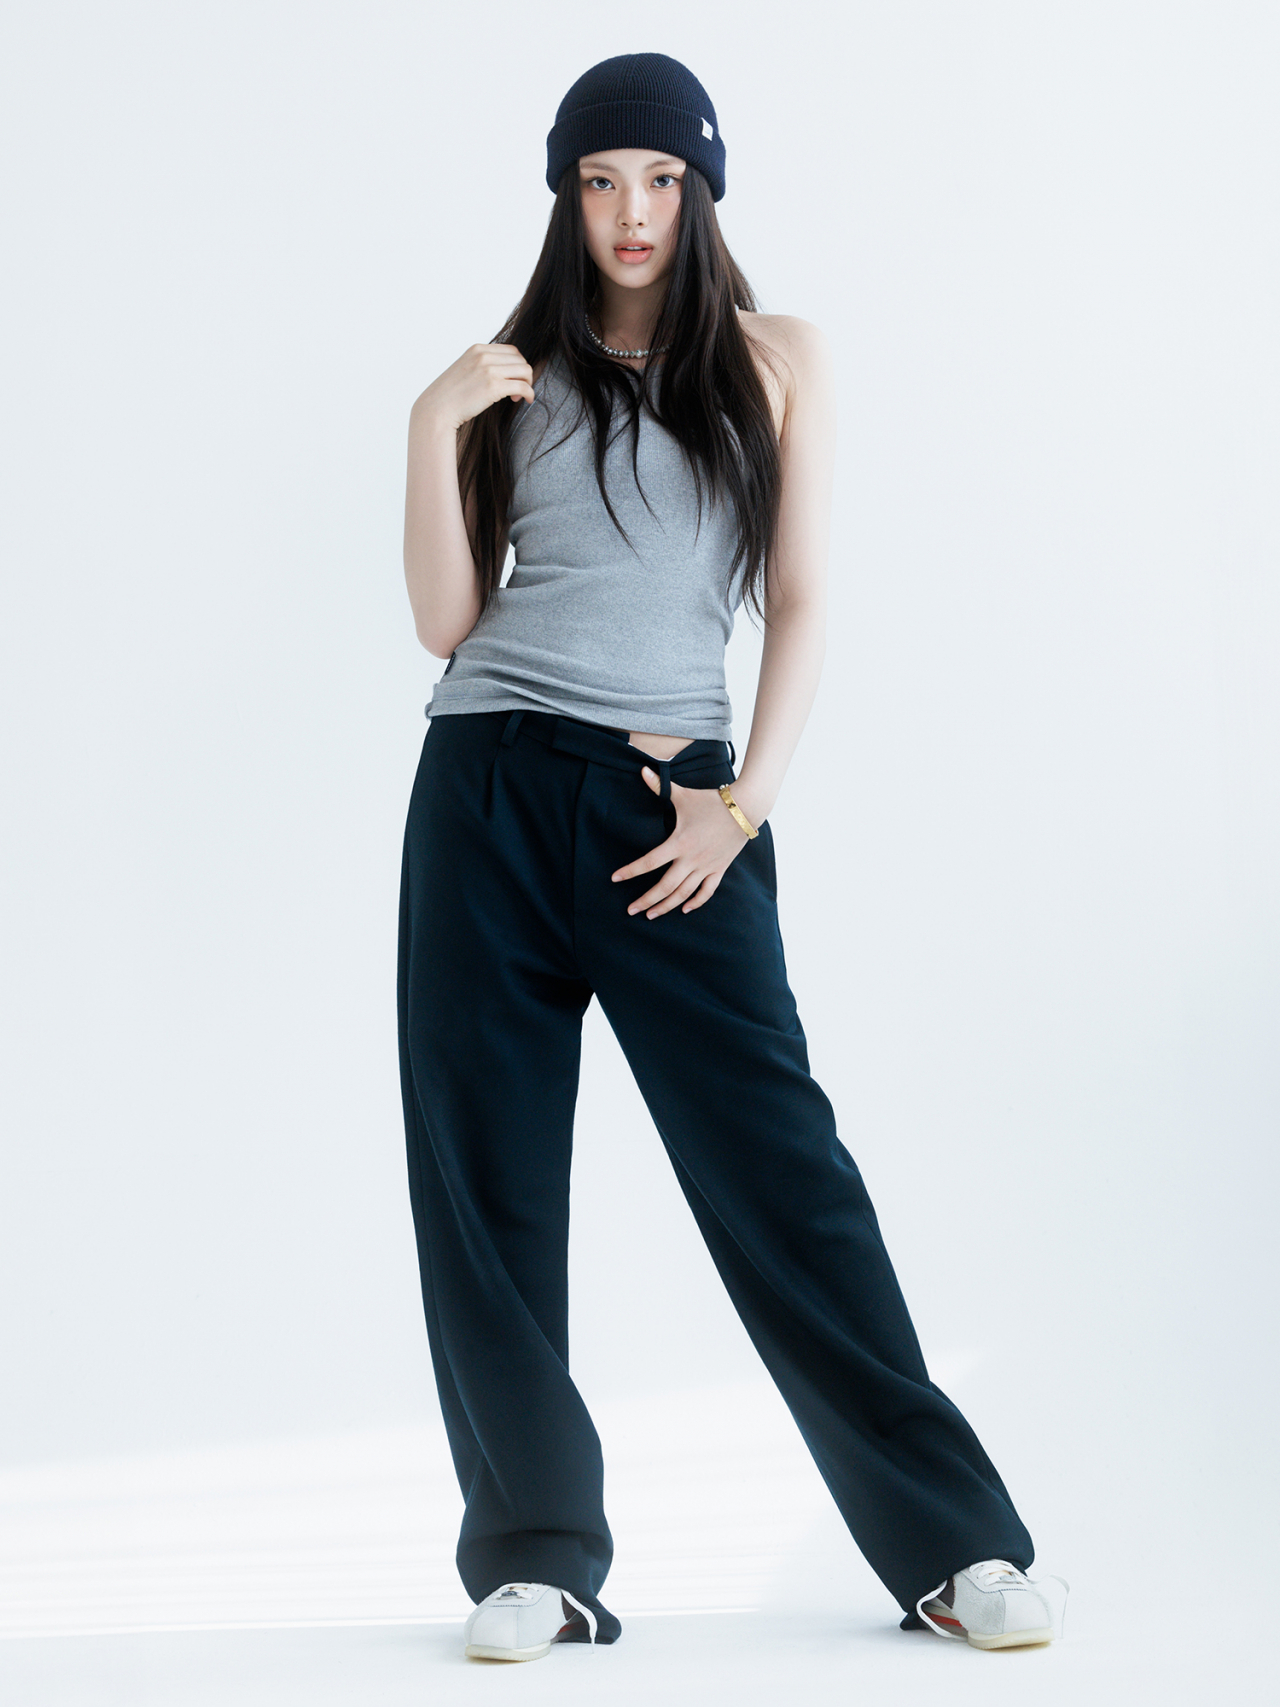 Hyein of NewJeans (Ador)